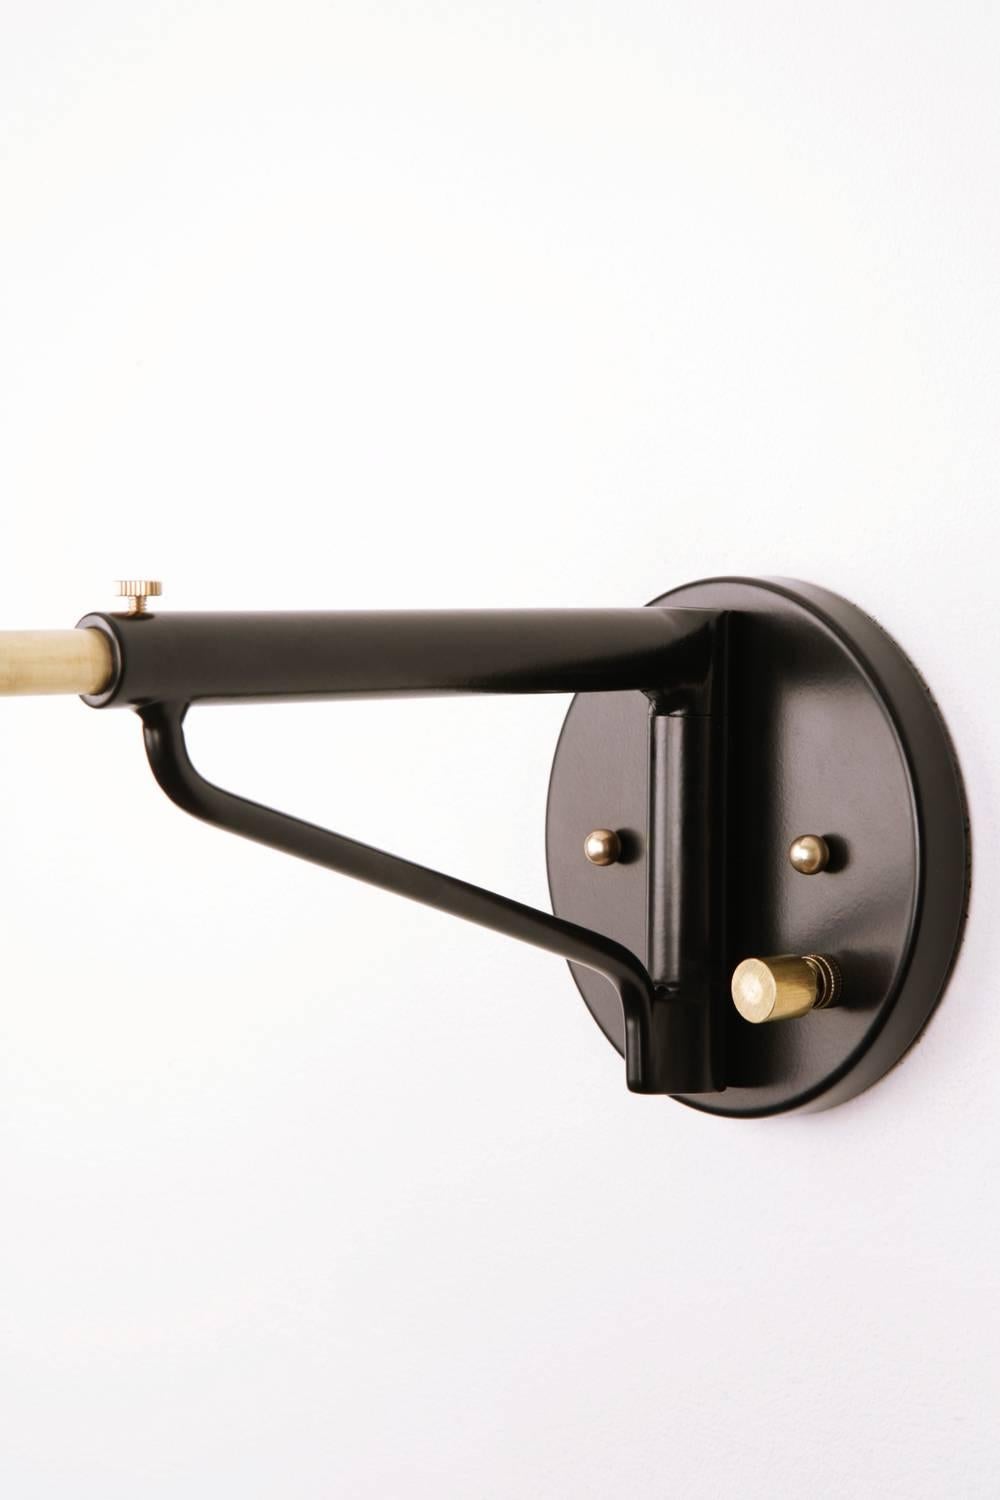 Powder-Coated Navire Jib Sconce With Solid Brass Arm And Tilting Shade In Nautical Style Lamp